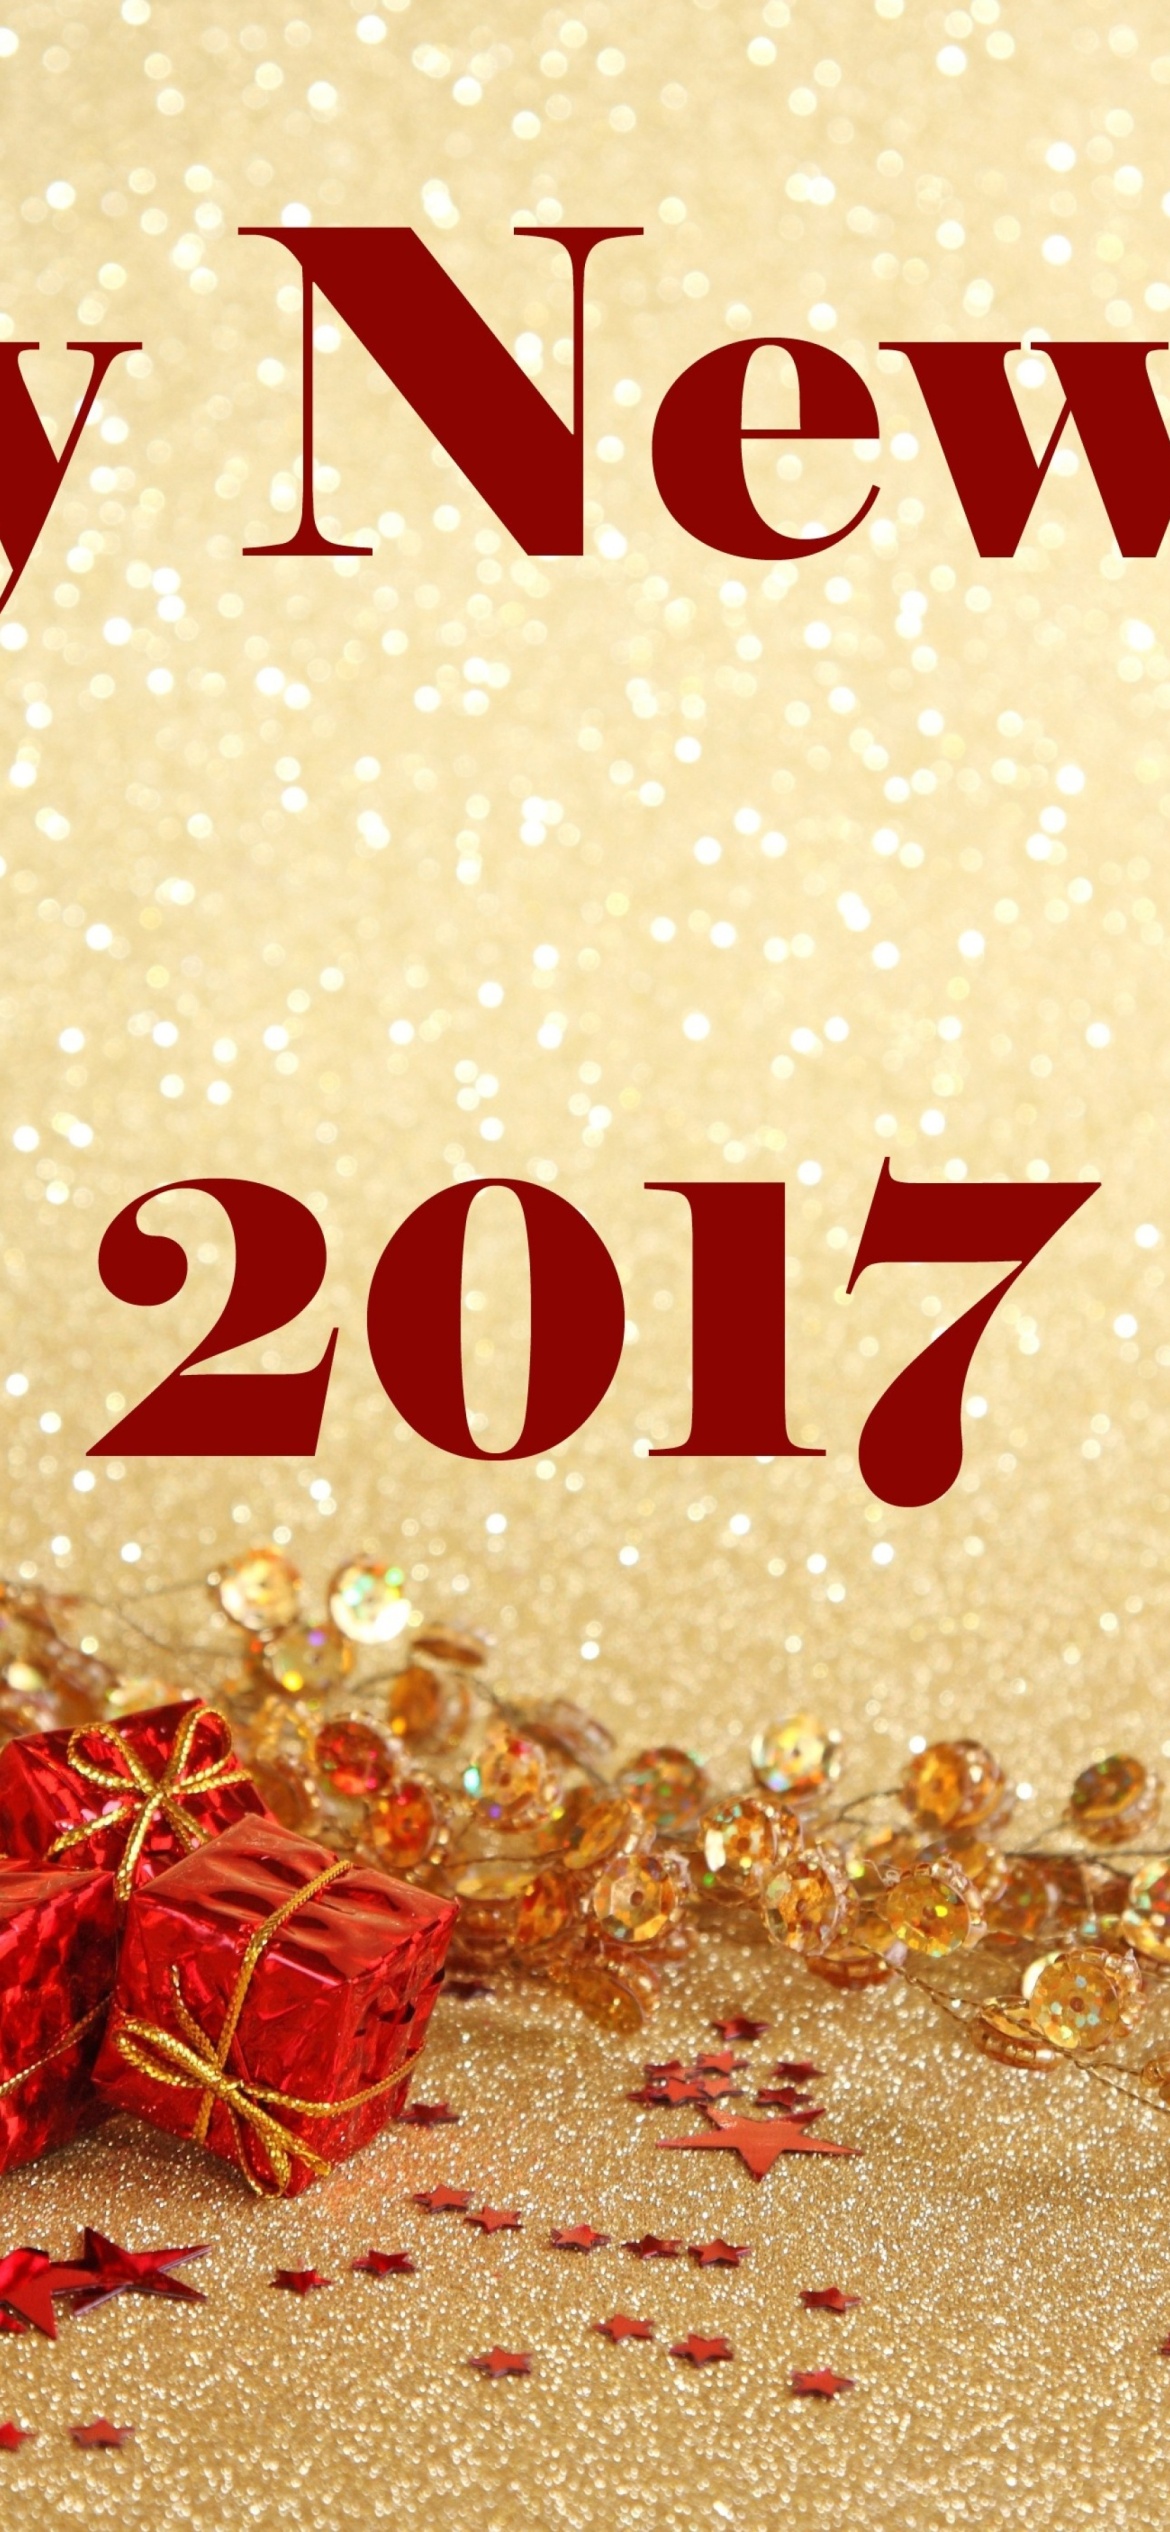 Das Happy New Year 2017 with Gifts Wallpaper 1170x2532